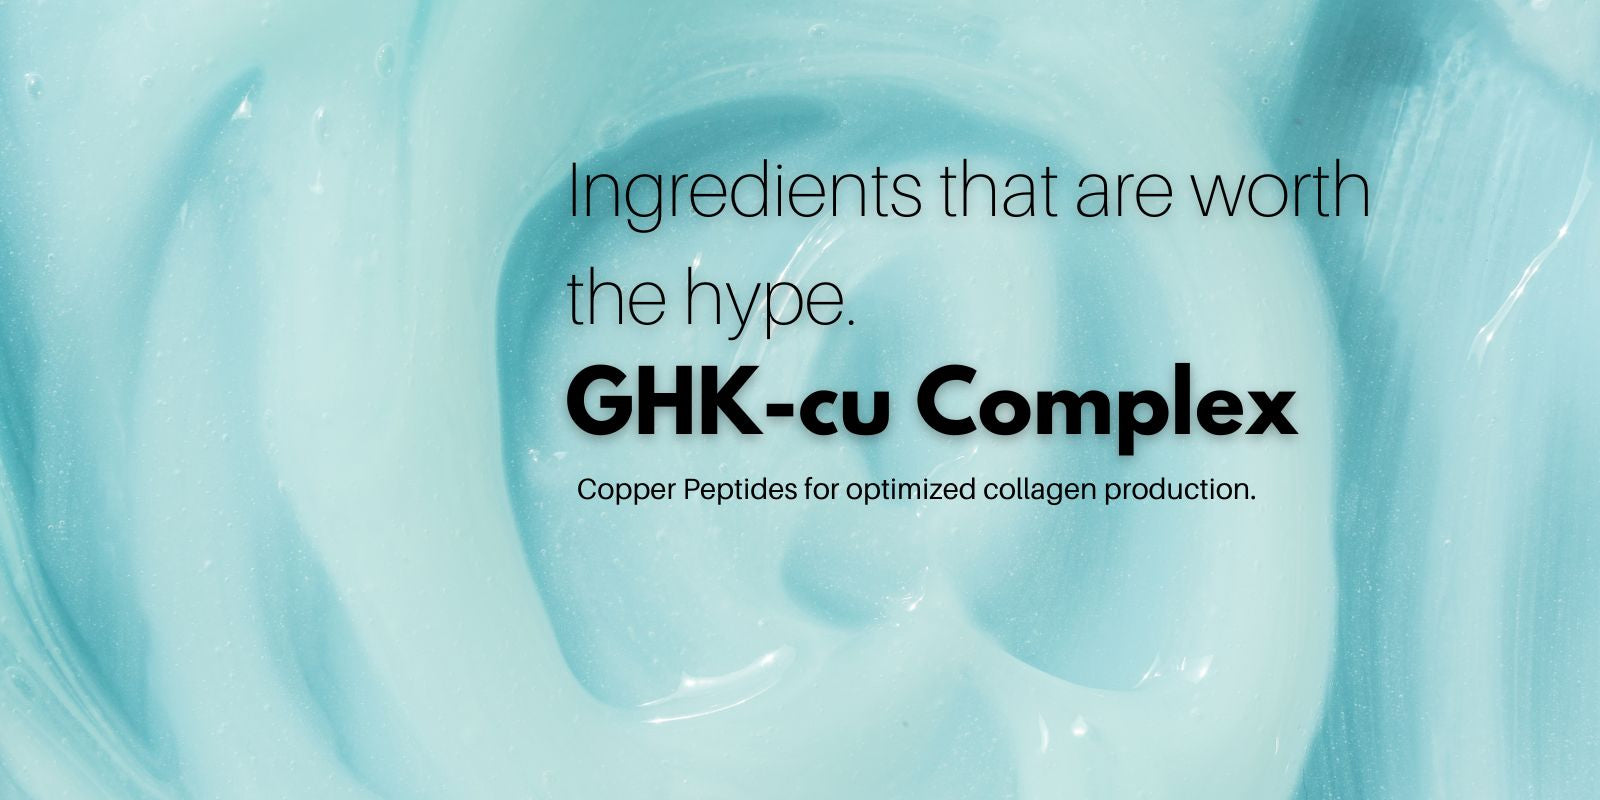 collagen peptides for collagen production and antiaging